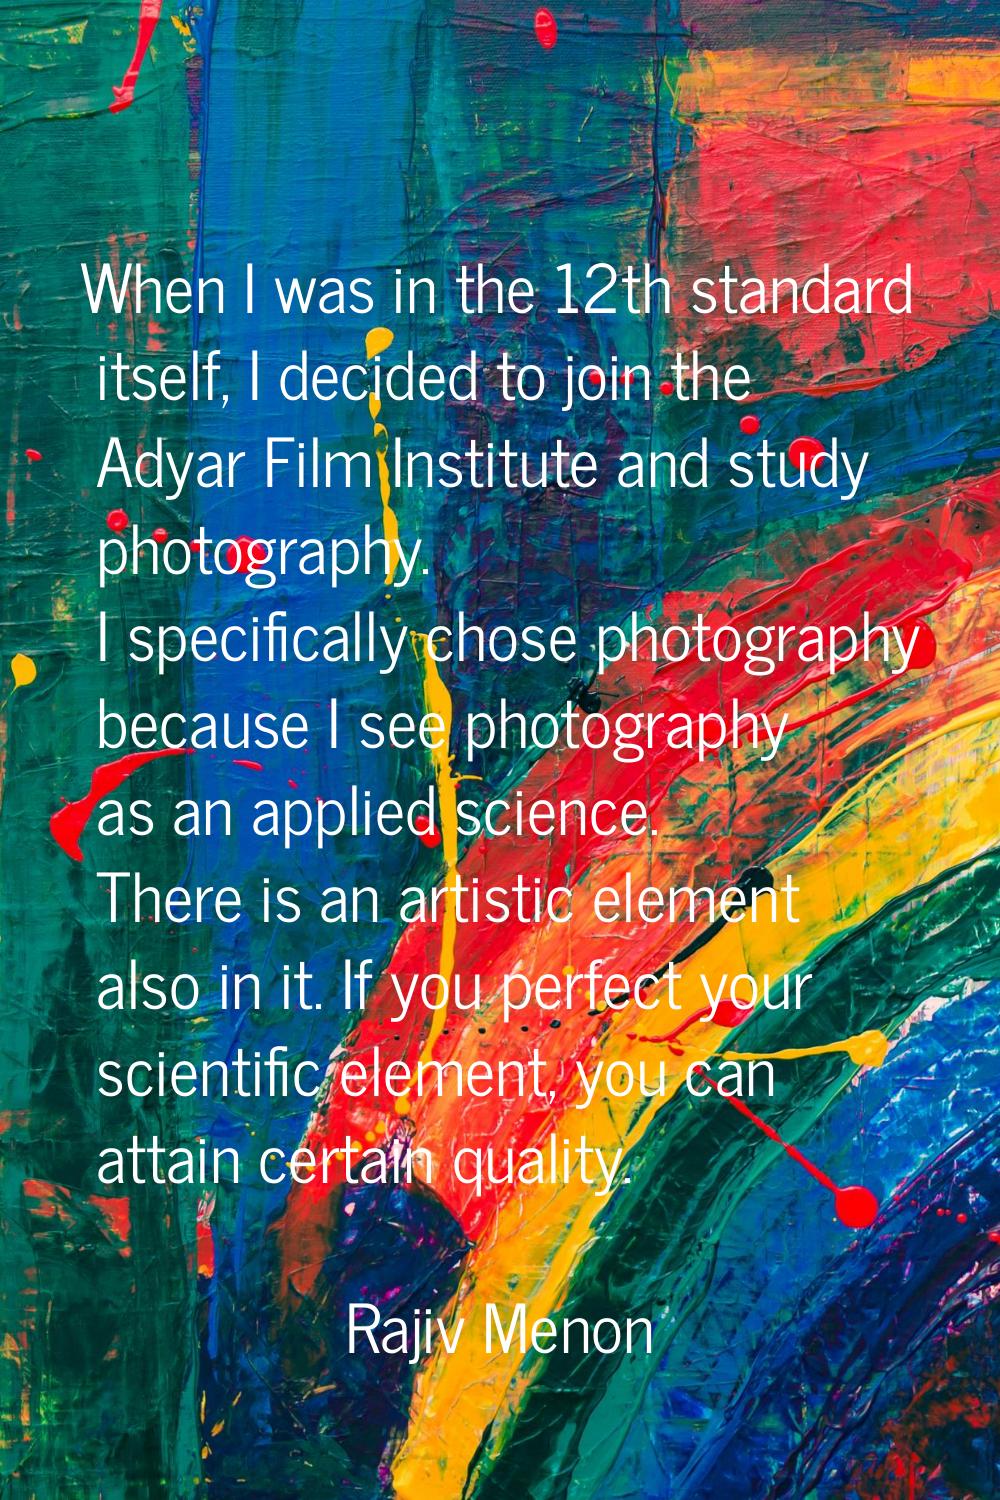 When I was in the 12th standard itself, I decided to join the Adyar Film Institute and study photog